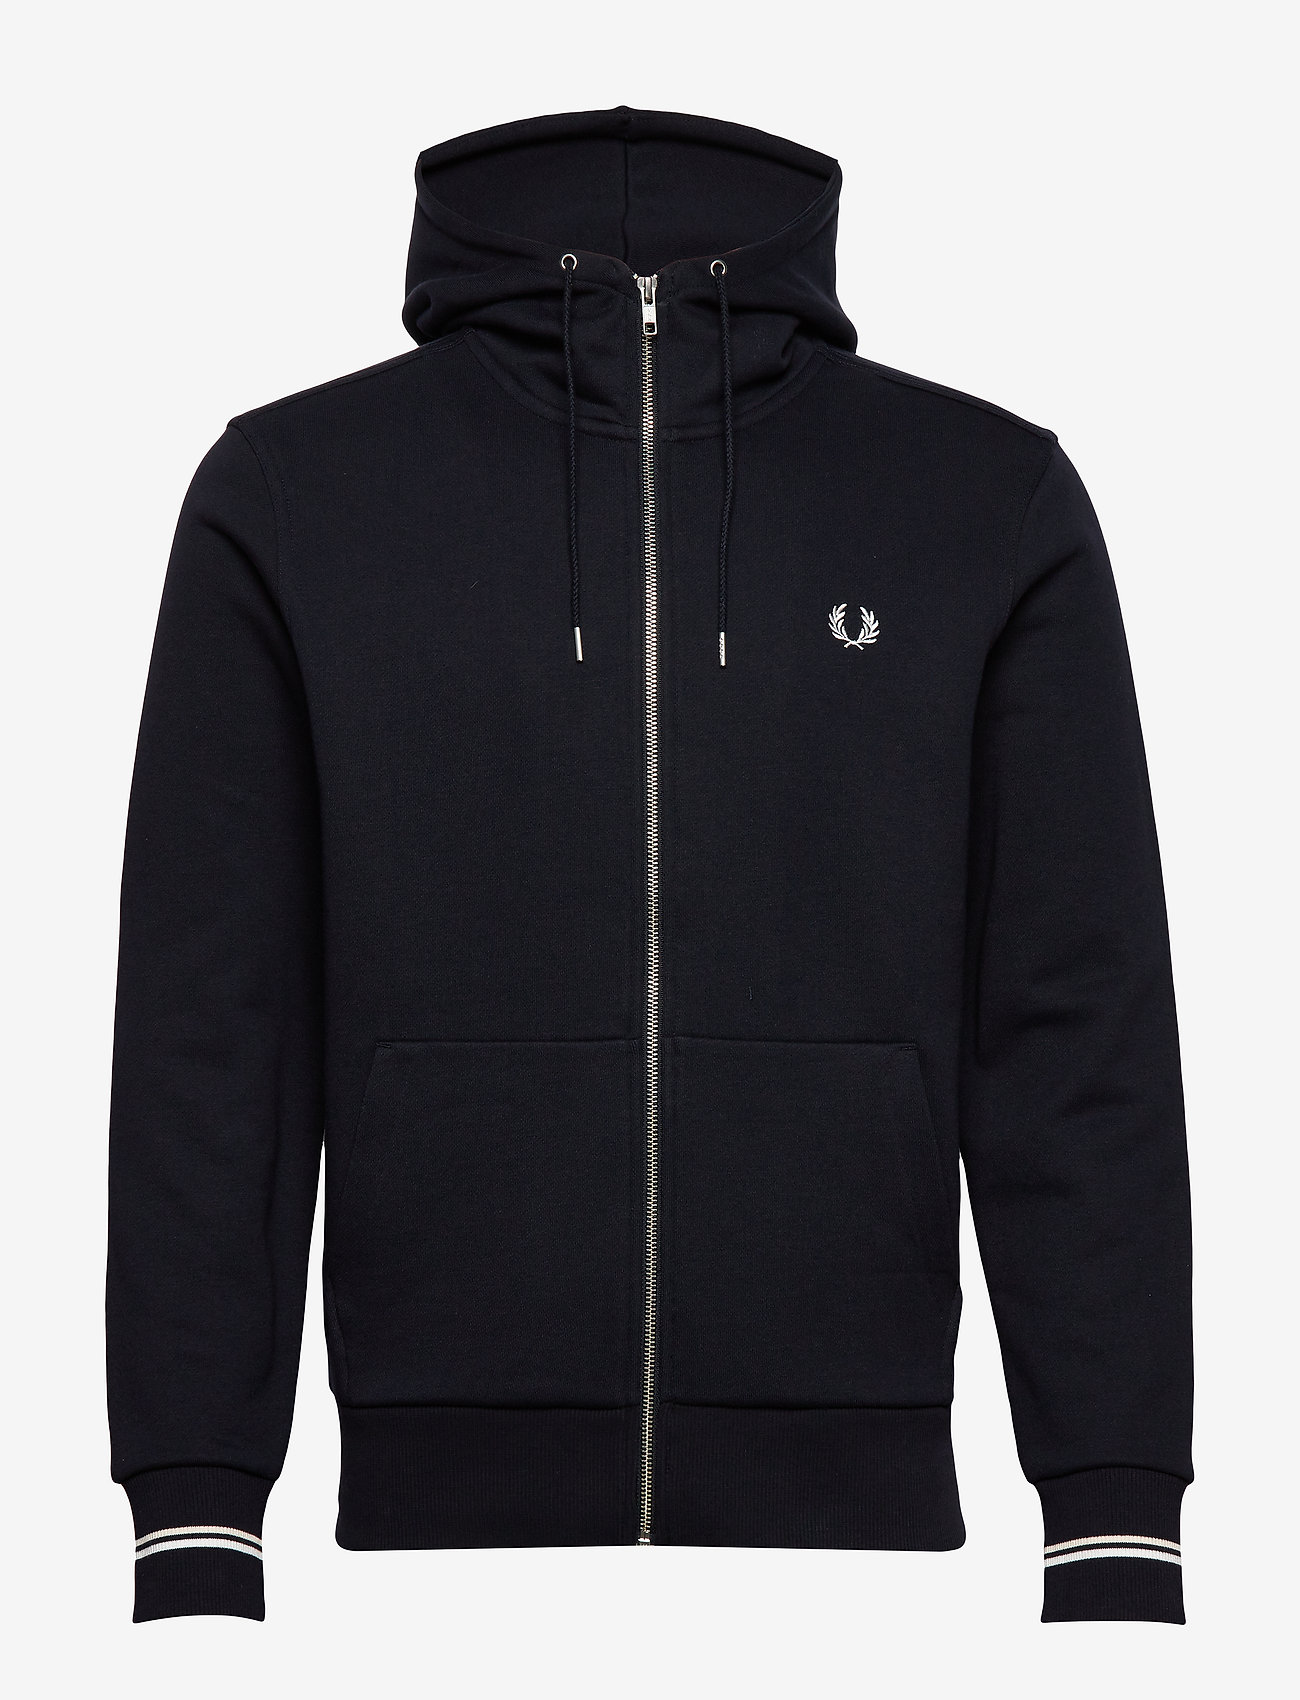 FRED PERRY - FRED PERRY フレッドペリー Hooded Sweatshirt 月桂樹の+